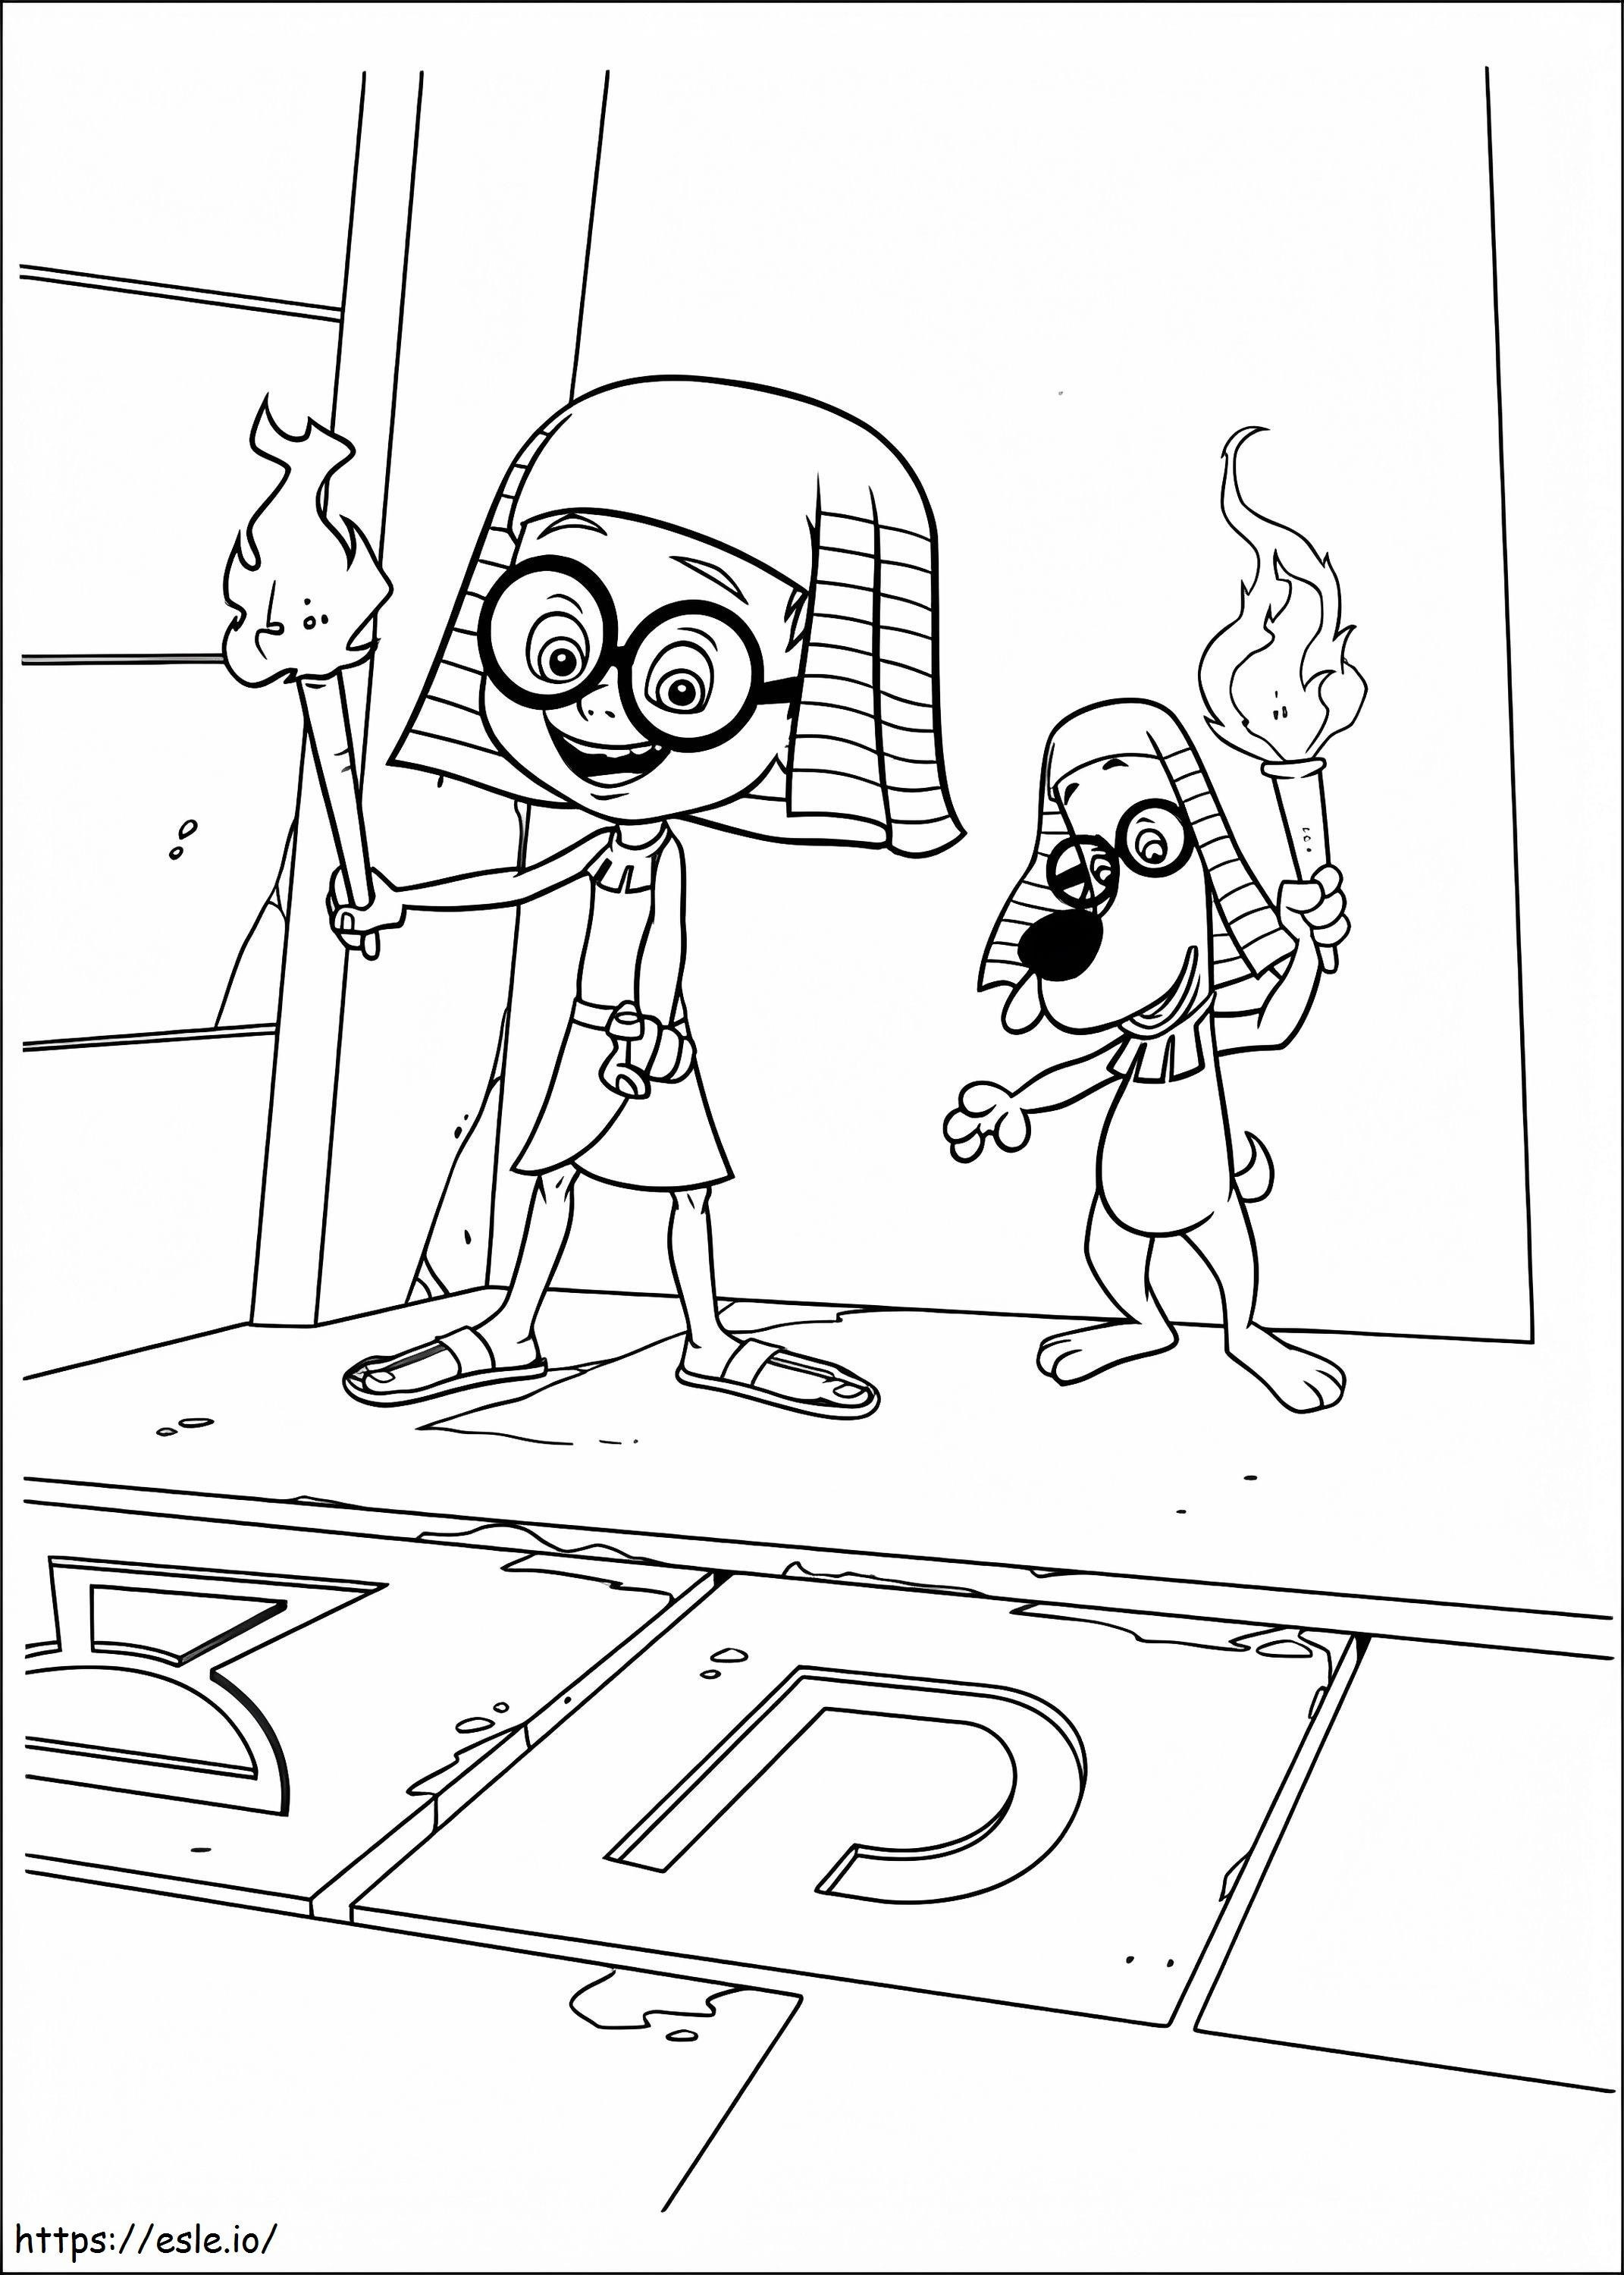 Mr. Peabody And Sherman 10 coloring page